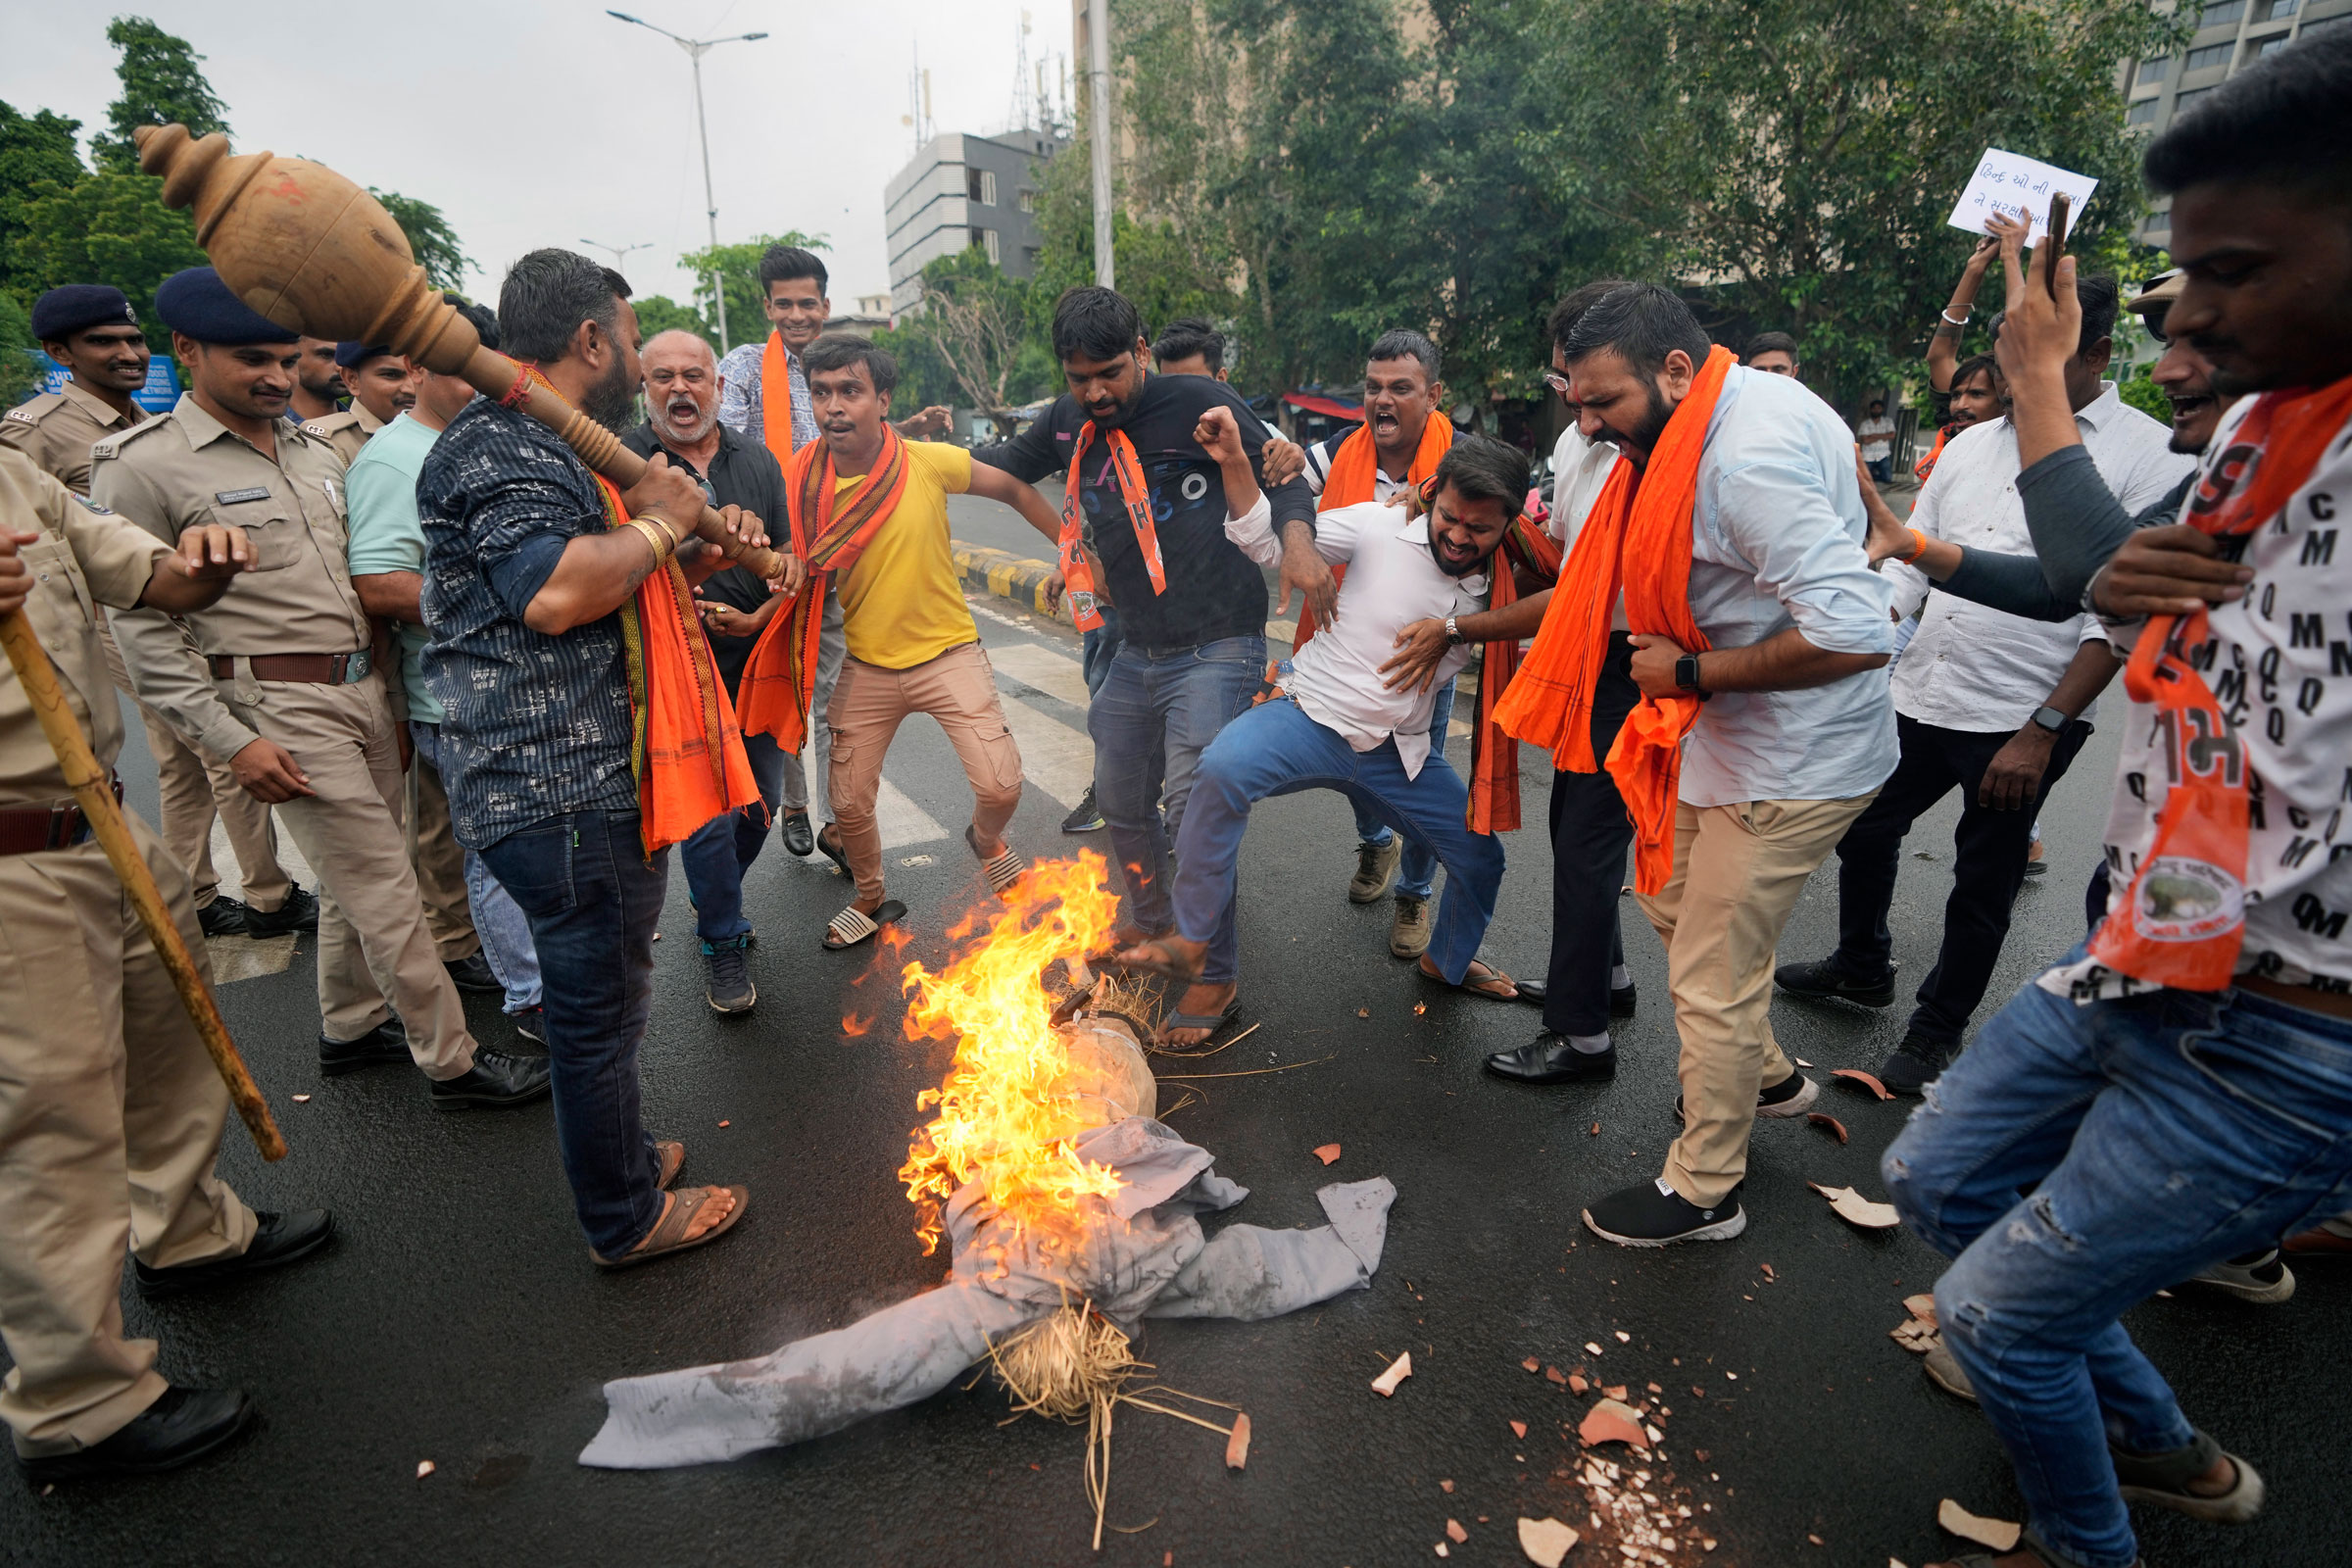 right-wing Hindu groups burn an effigy and shout slogans in Ahmedabad, India